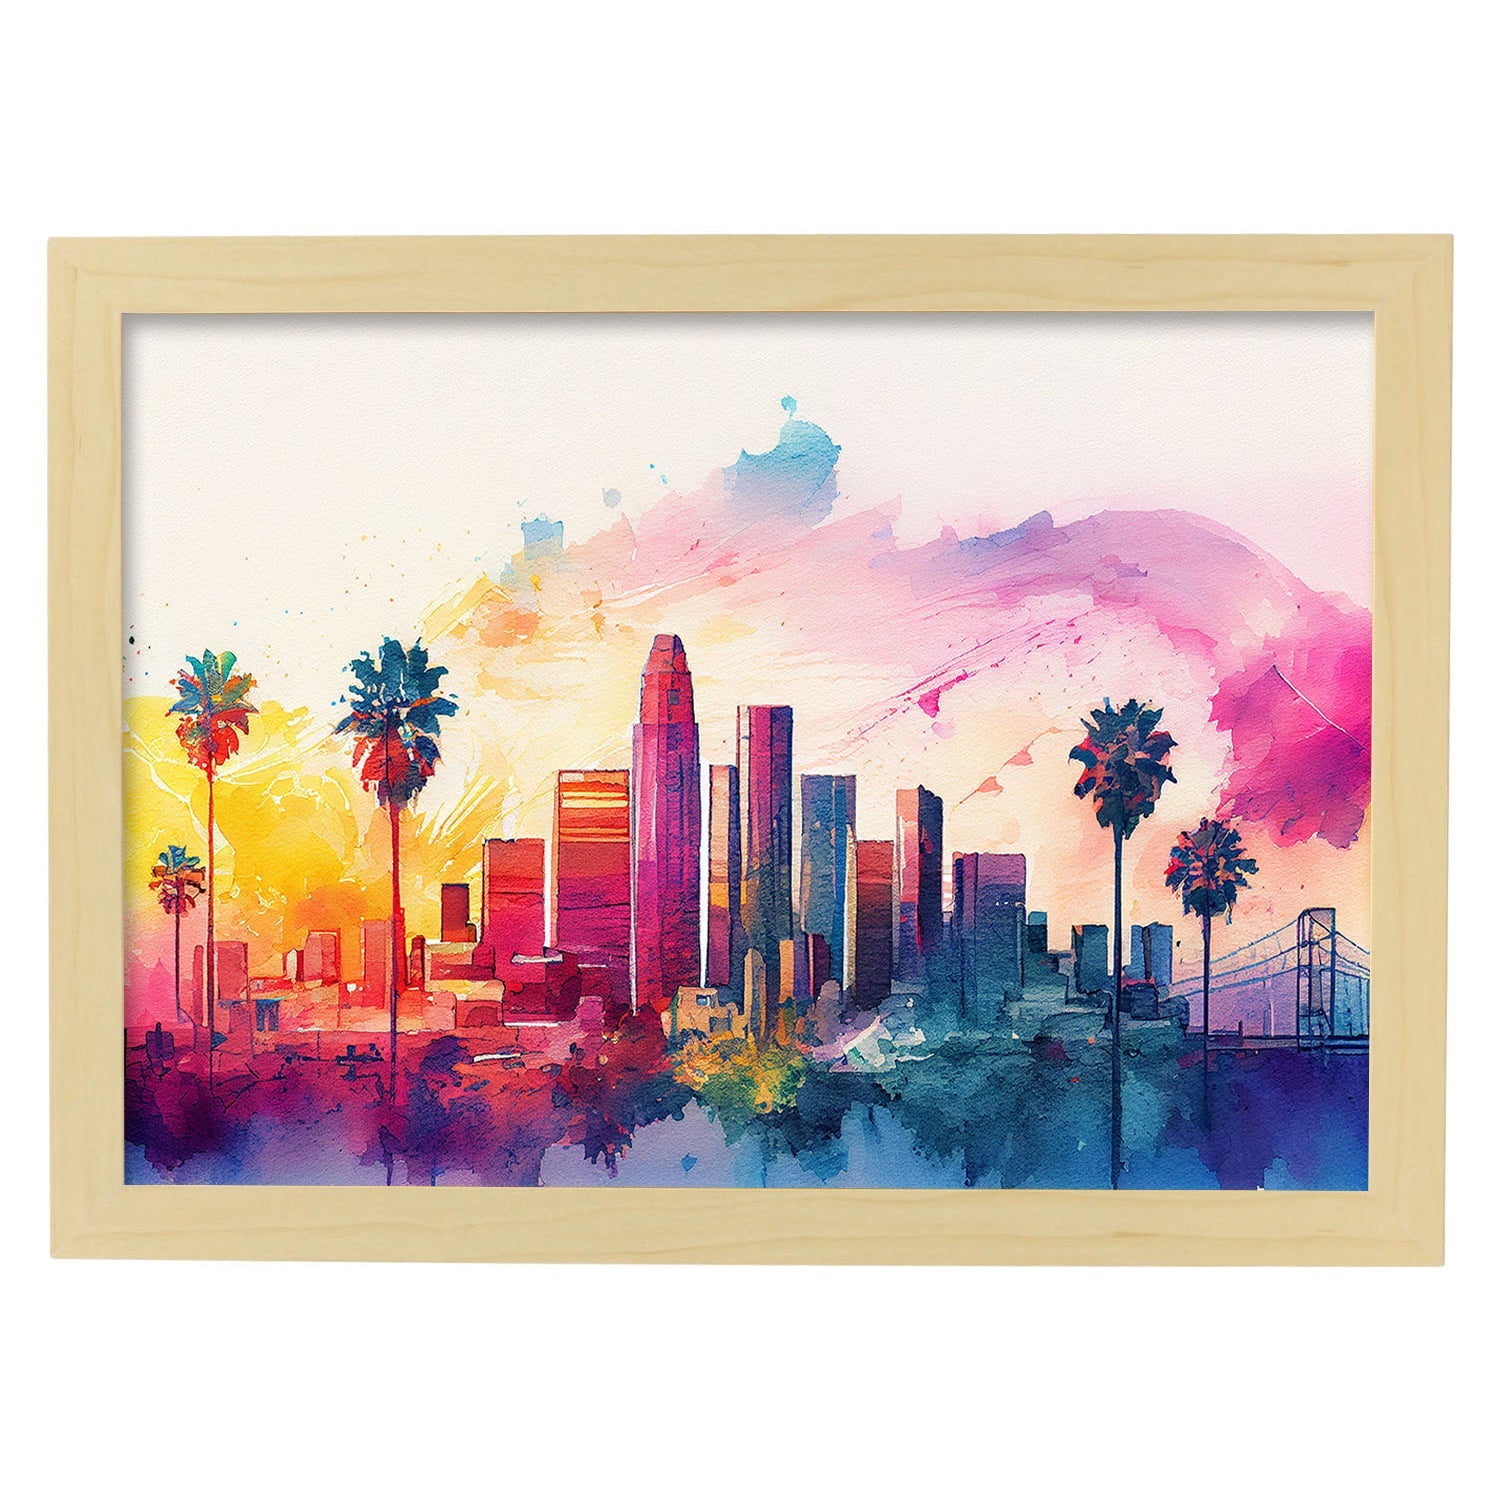 Nacnic watercolor of a skyline of the city of Los Angeles_3. Aesthetic Wall Art Prints for Bedroom or Living Room Design.-Artwork-Nacnic-A4-Marco Madera Clara-Nacnic Estudio SL